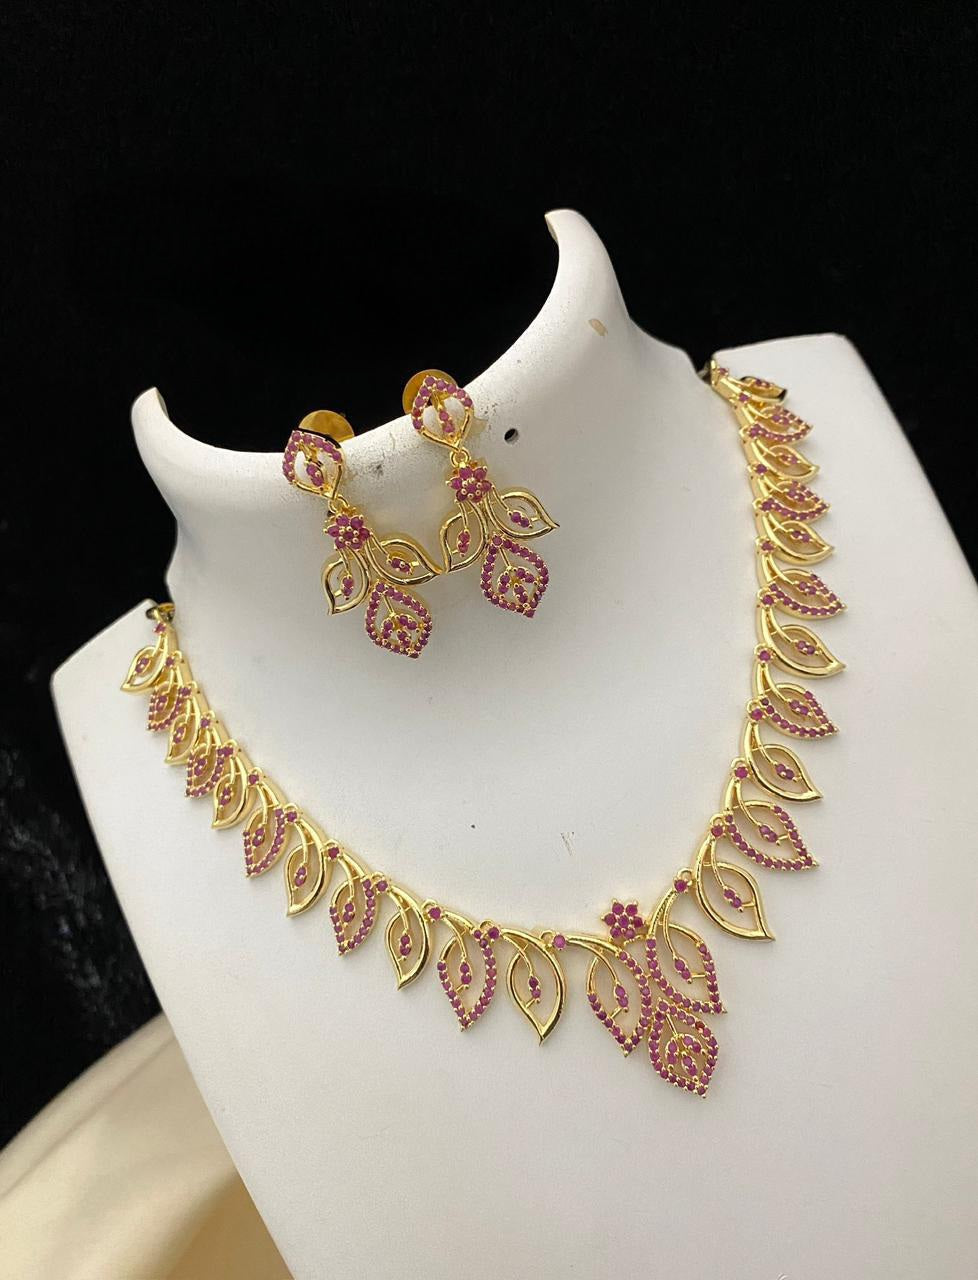 Indian 22K Gold Plated Wedding Necklace Earrings Jewelry Set Variations 8''  Set | eBay